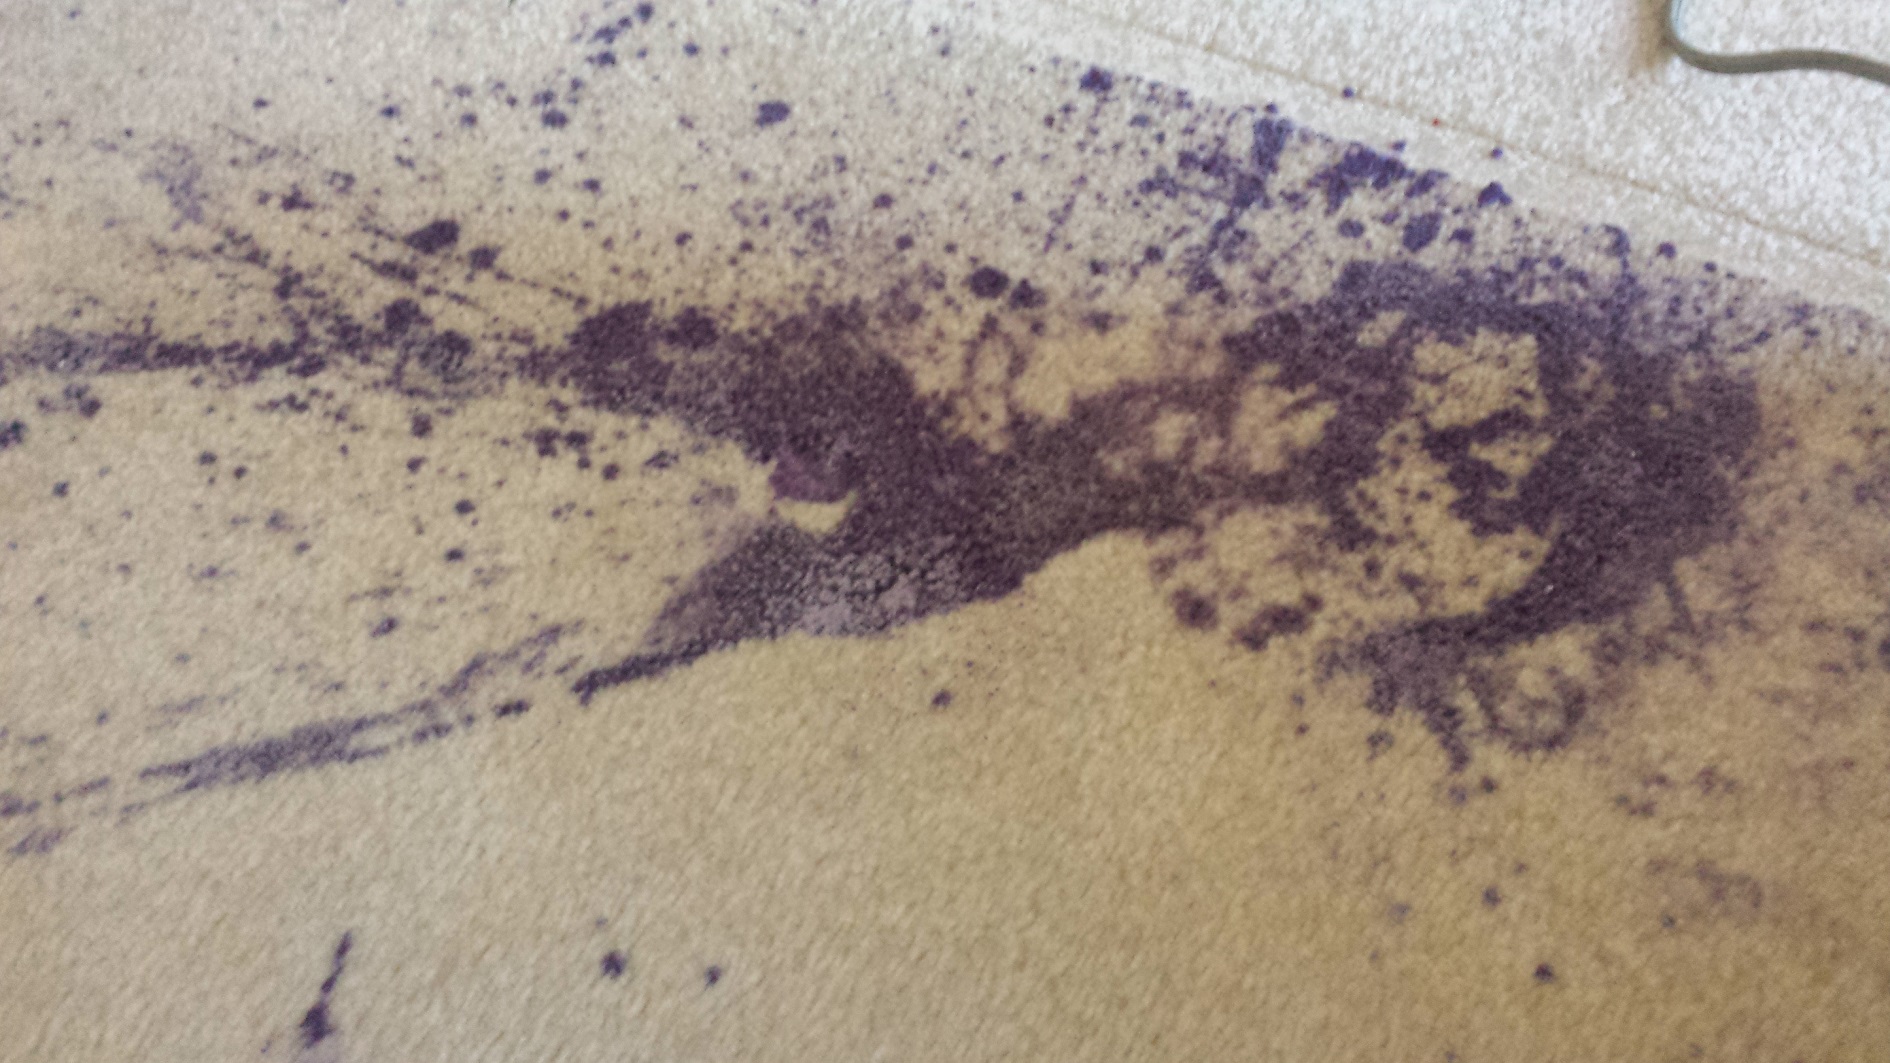 Carpet Stain Removal 